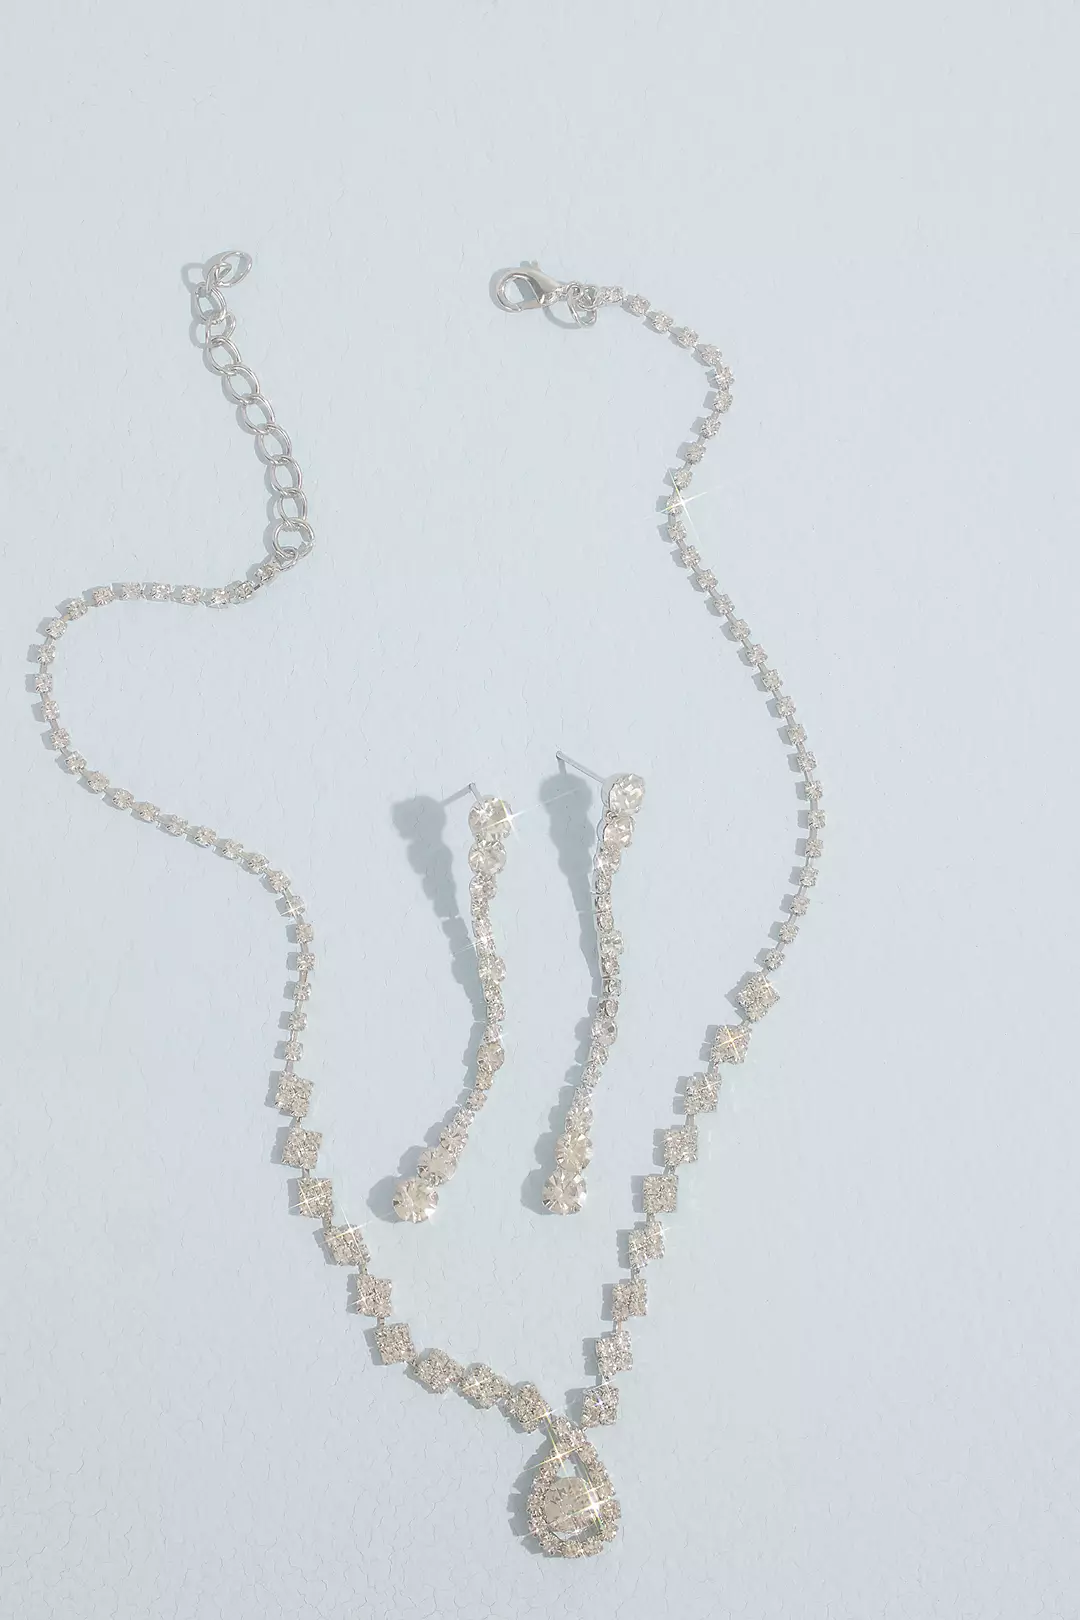 Crystal Teardrop Necklace and Earring Set Image